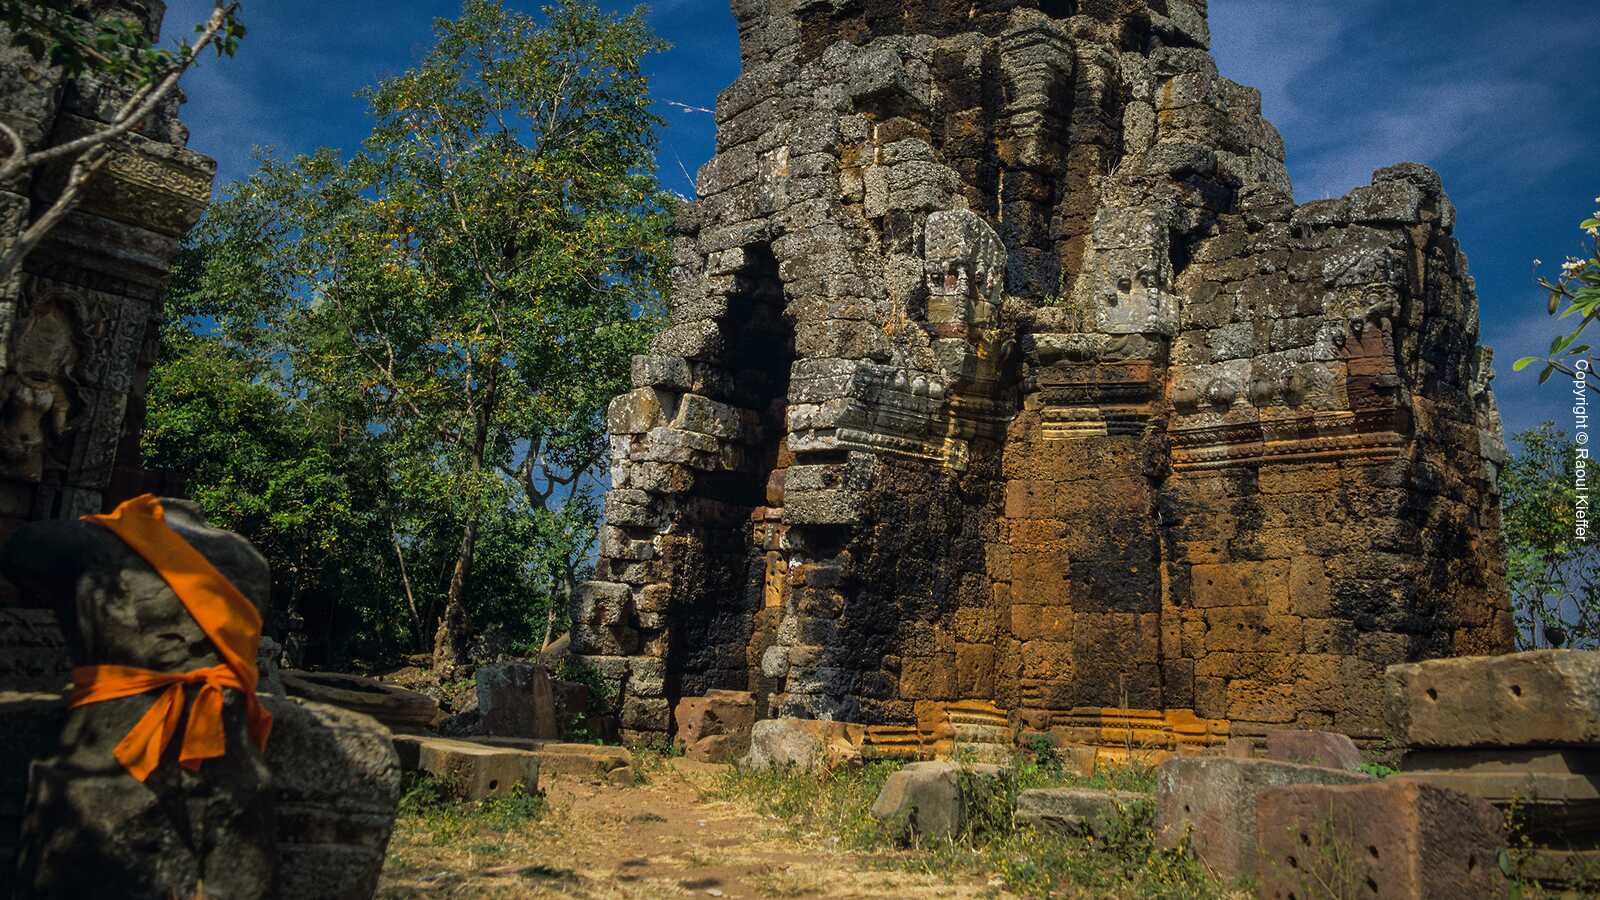 Other sites in Cambodia